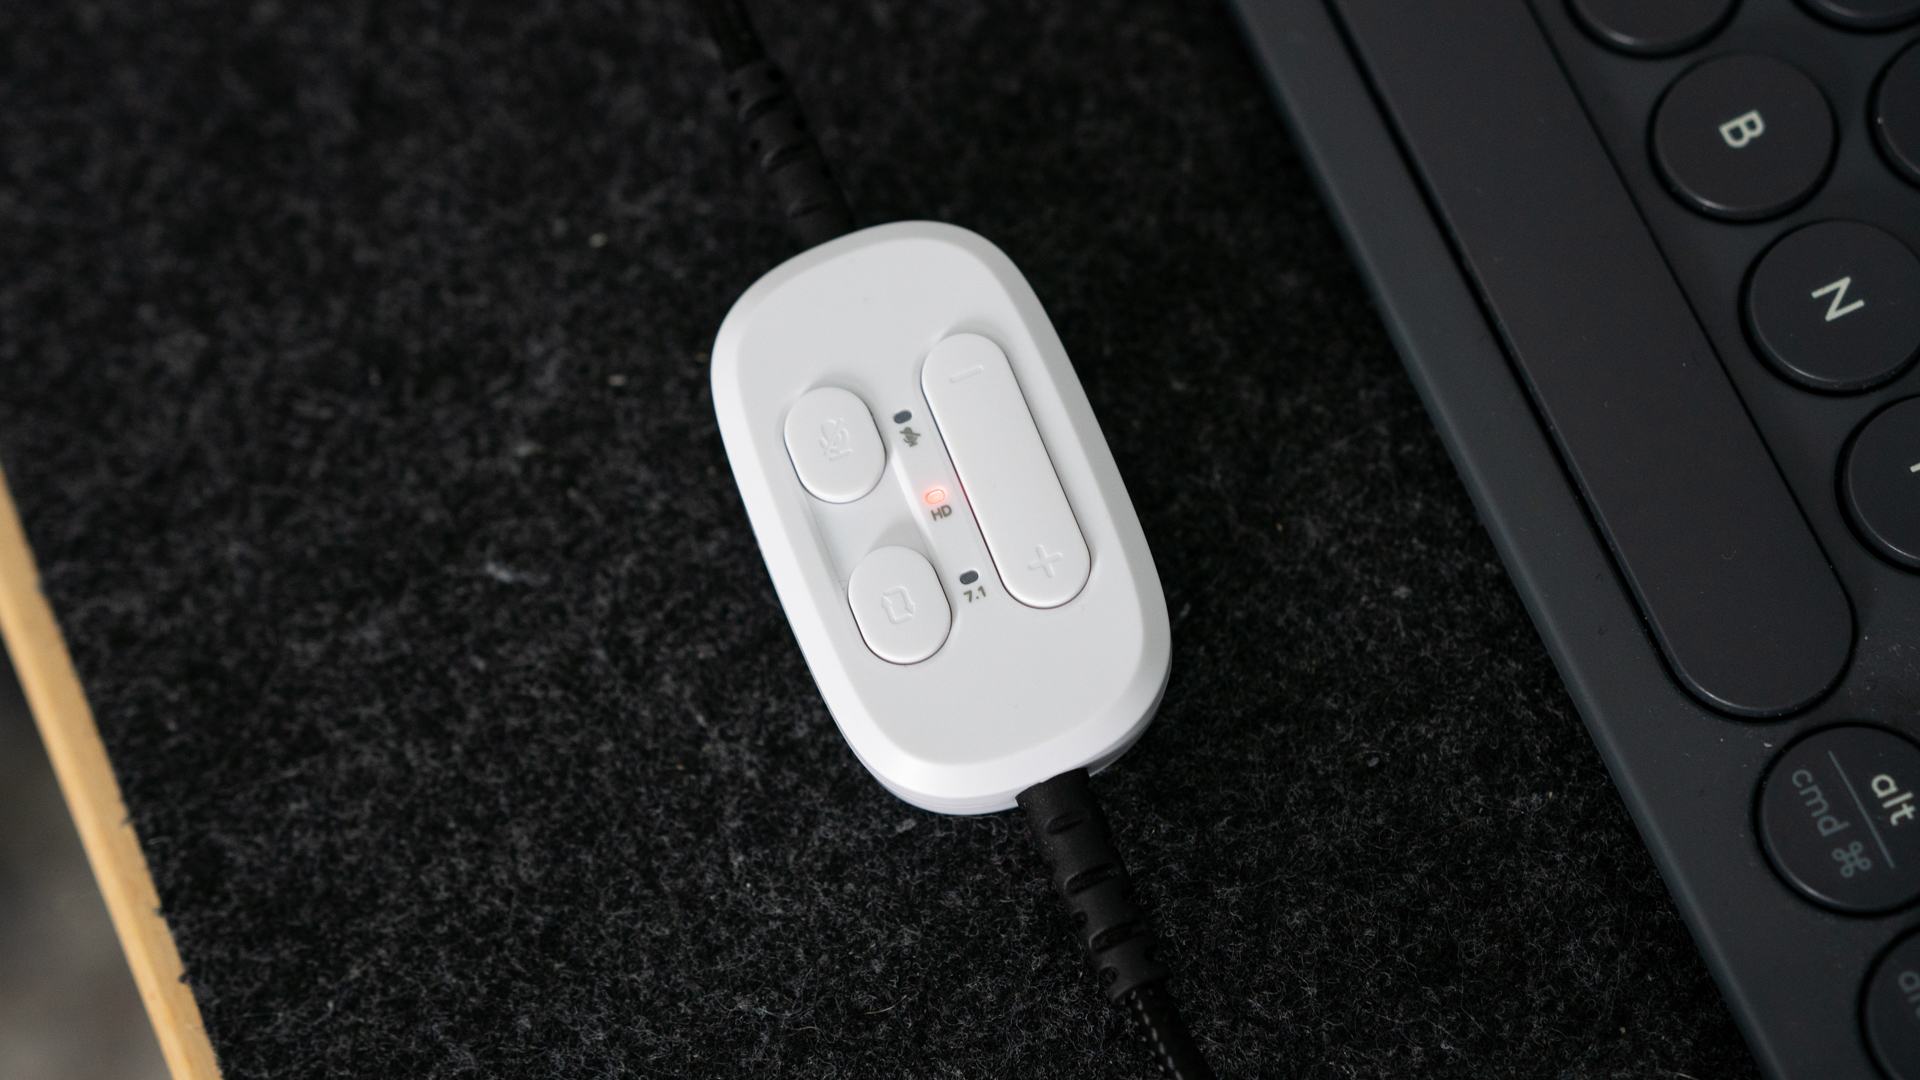 Pictured is the control module of the Tritton Kunai Pro.